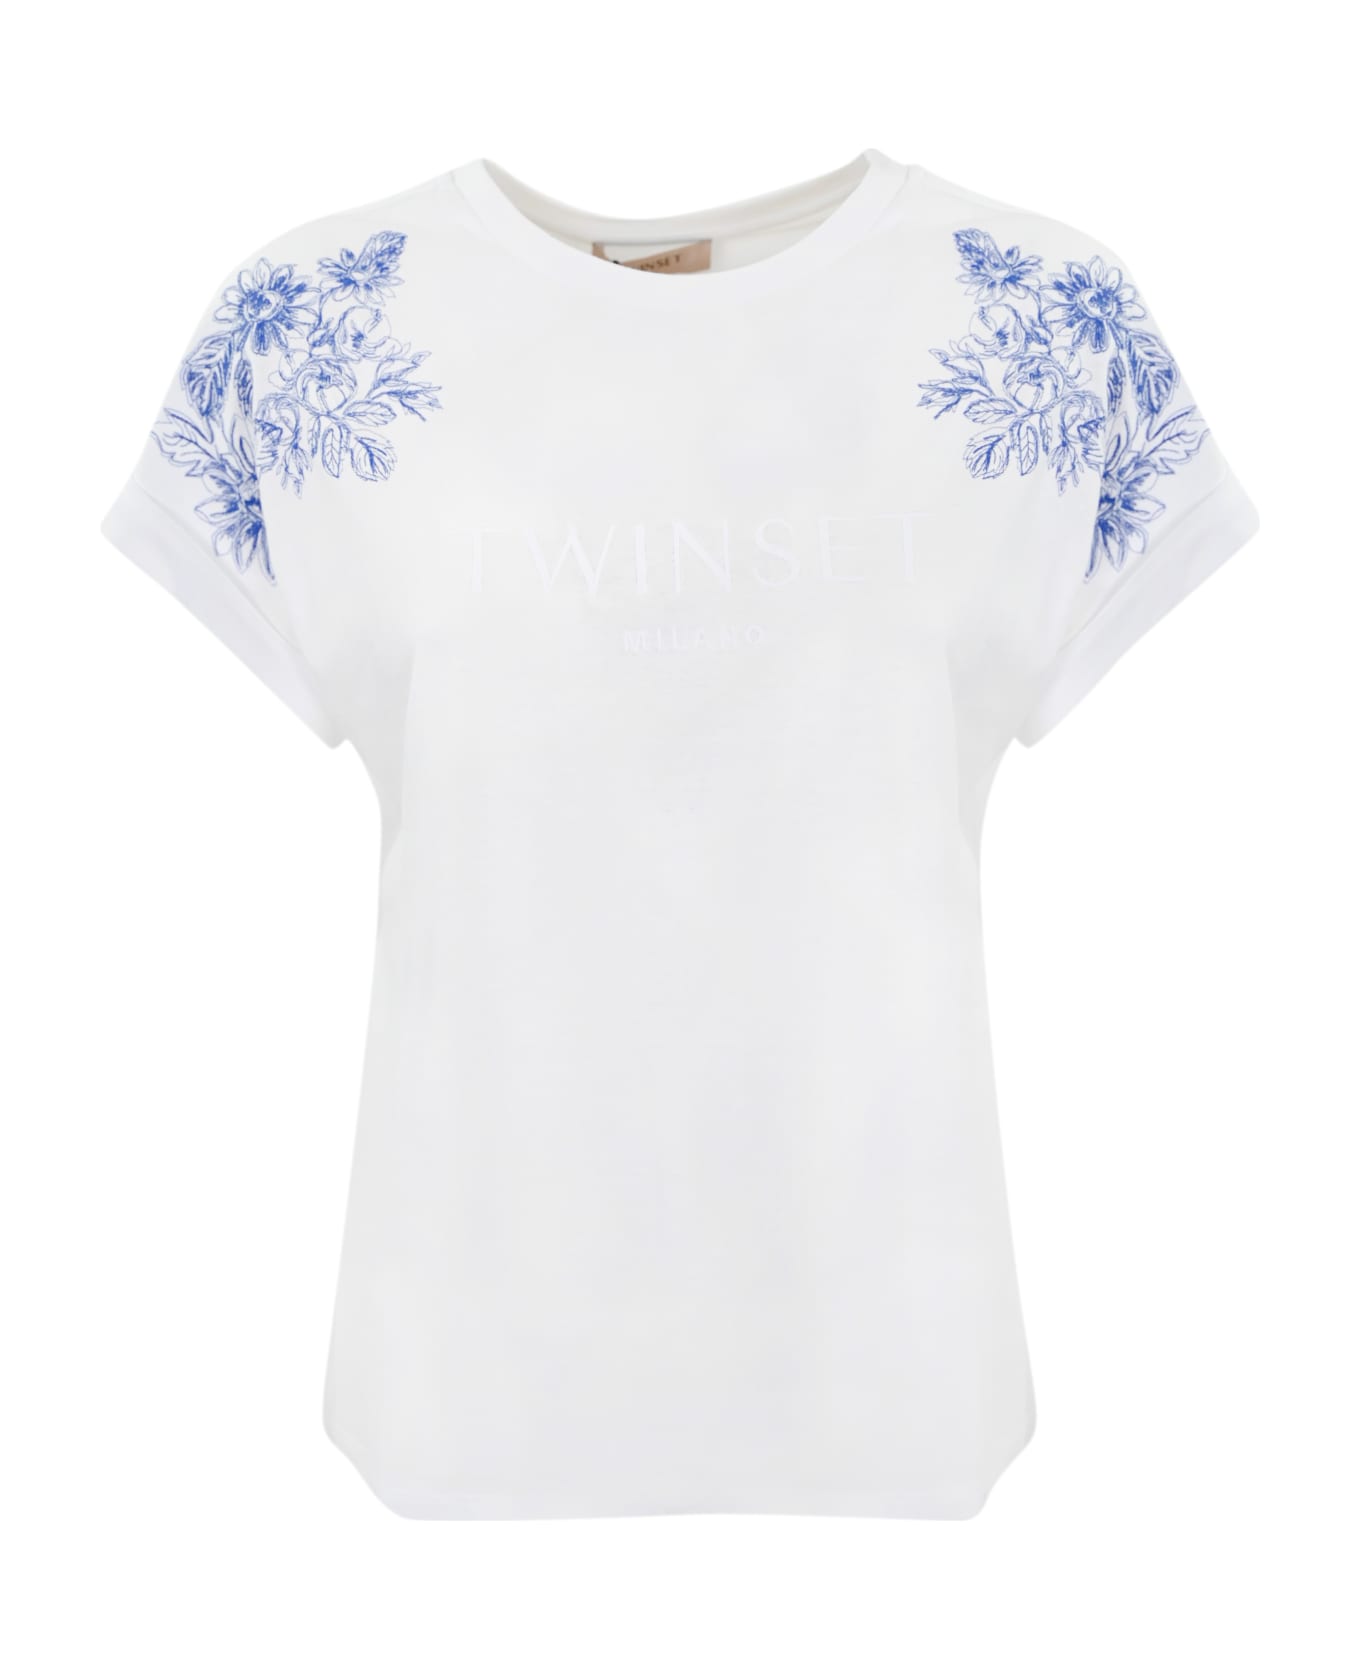 TwinSet T-shirt With Floral Embroidery - Blue